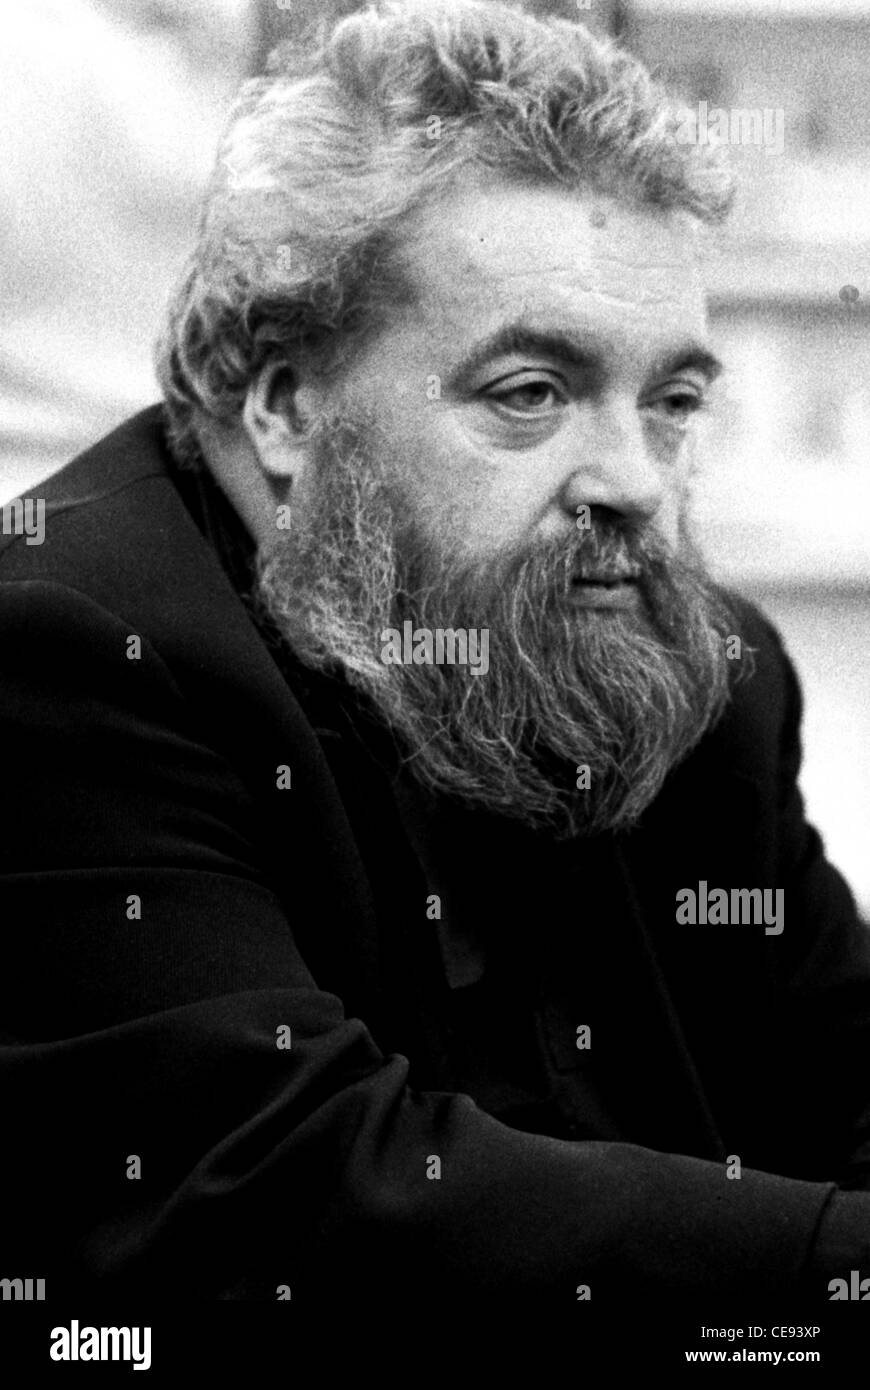 Helmut Qualtinger - *08.10.1928 - 29.09.1986: Portrait of the Austrian actor and writer at the Frankfurt Book fair. Stock Photo